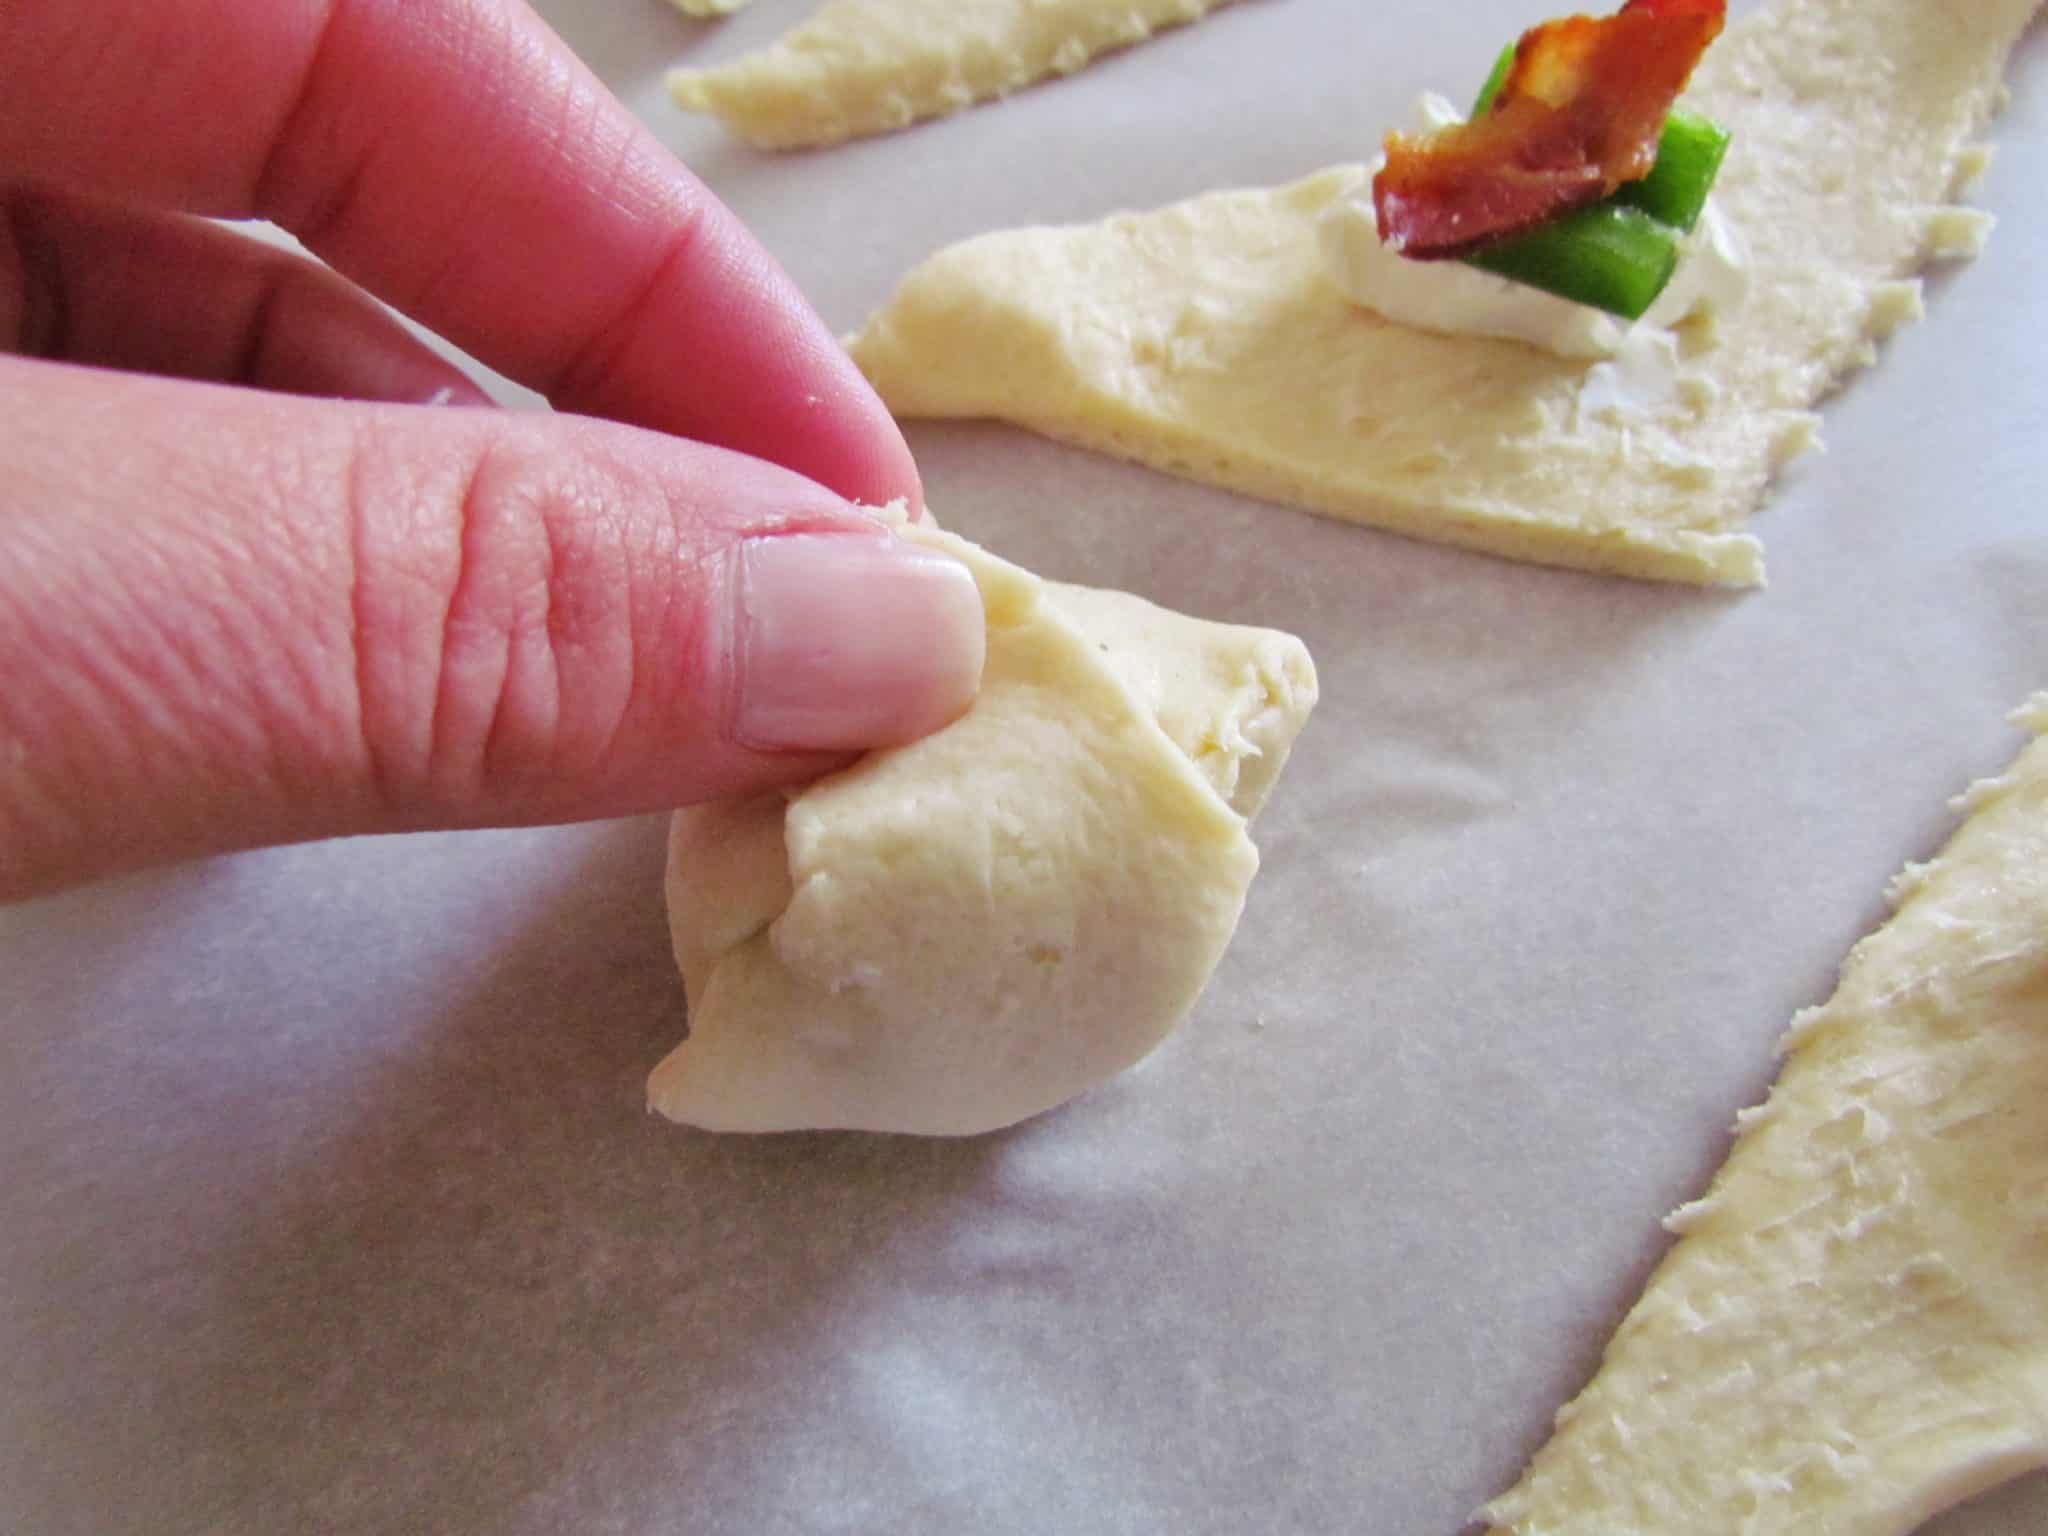 rolling up crescent roll dough to cover cream cheese filling.